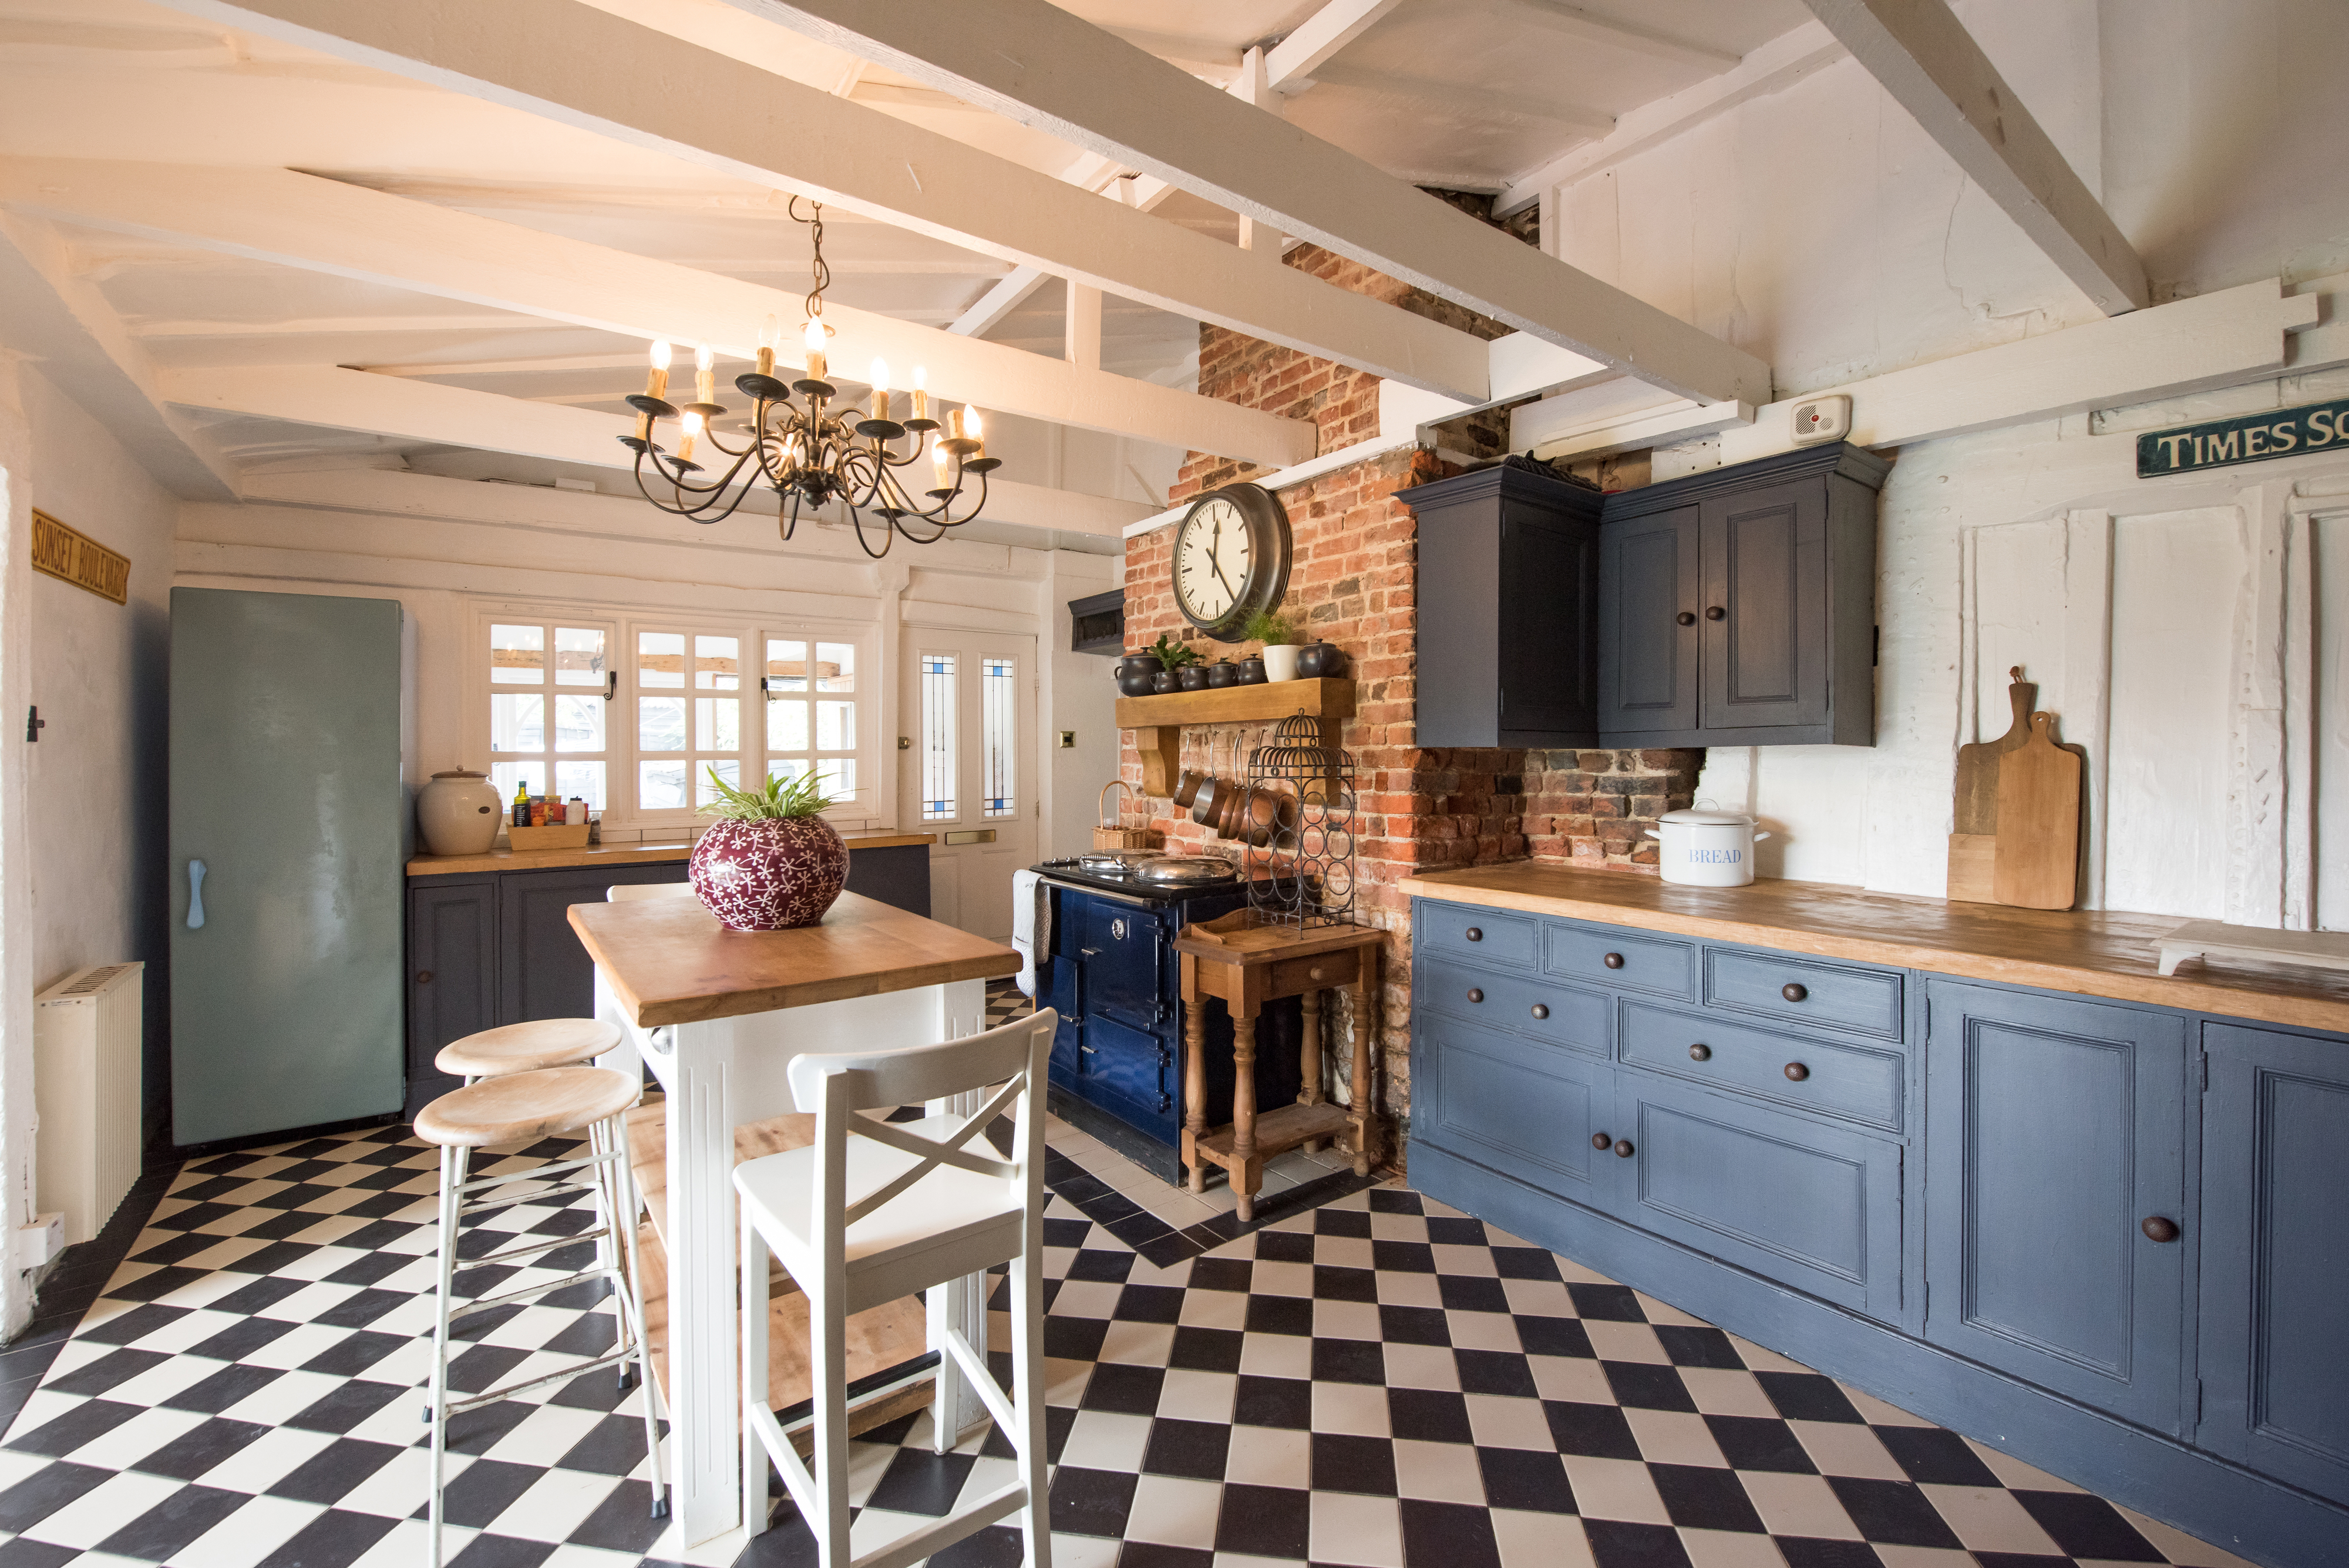 vintage style kitchen with checkerboard tile floor